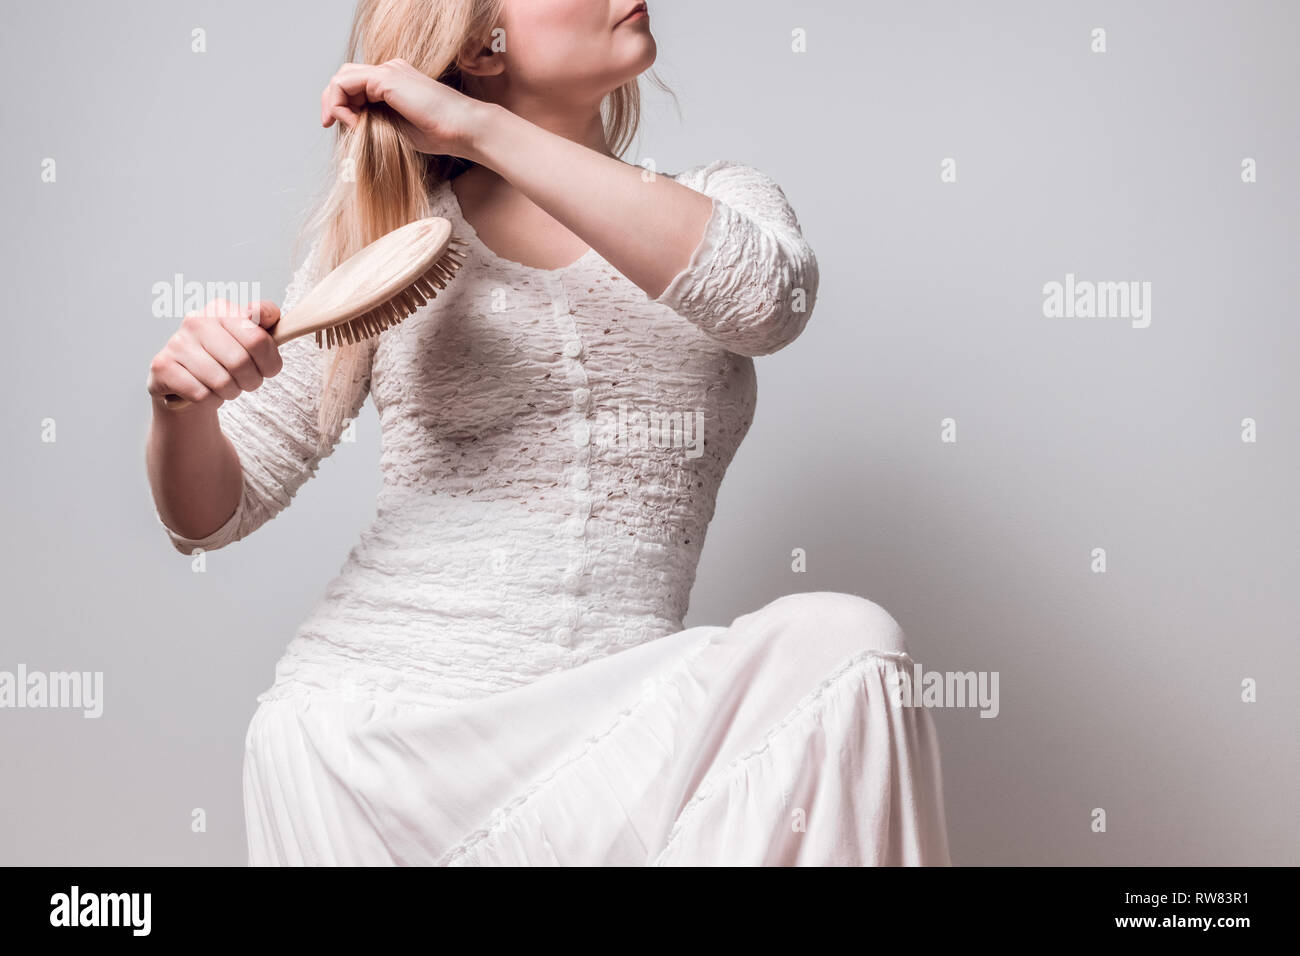 Young woman in white brushing her long blond hair with a wooden hairbrush. Stock Photo